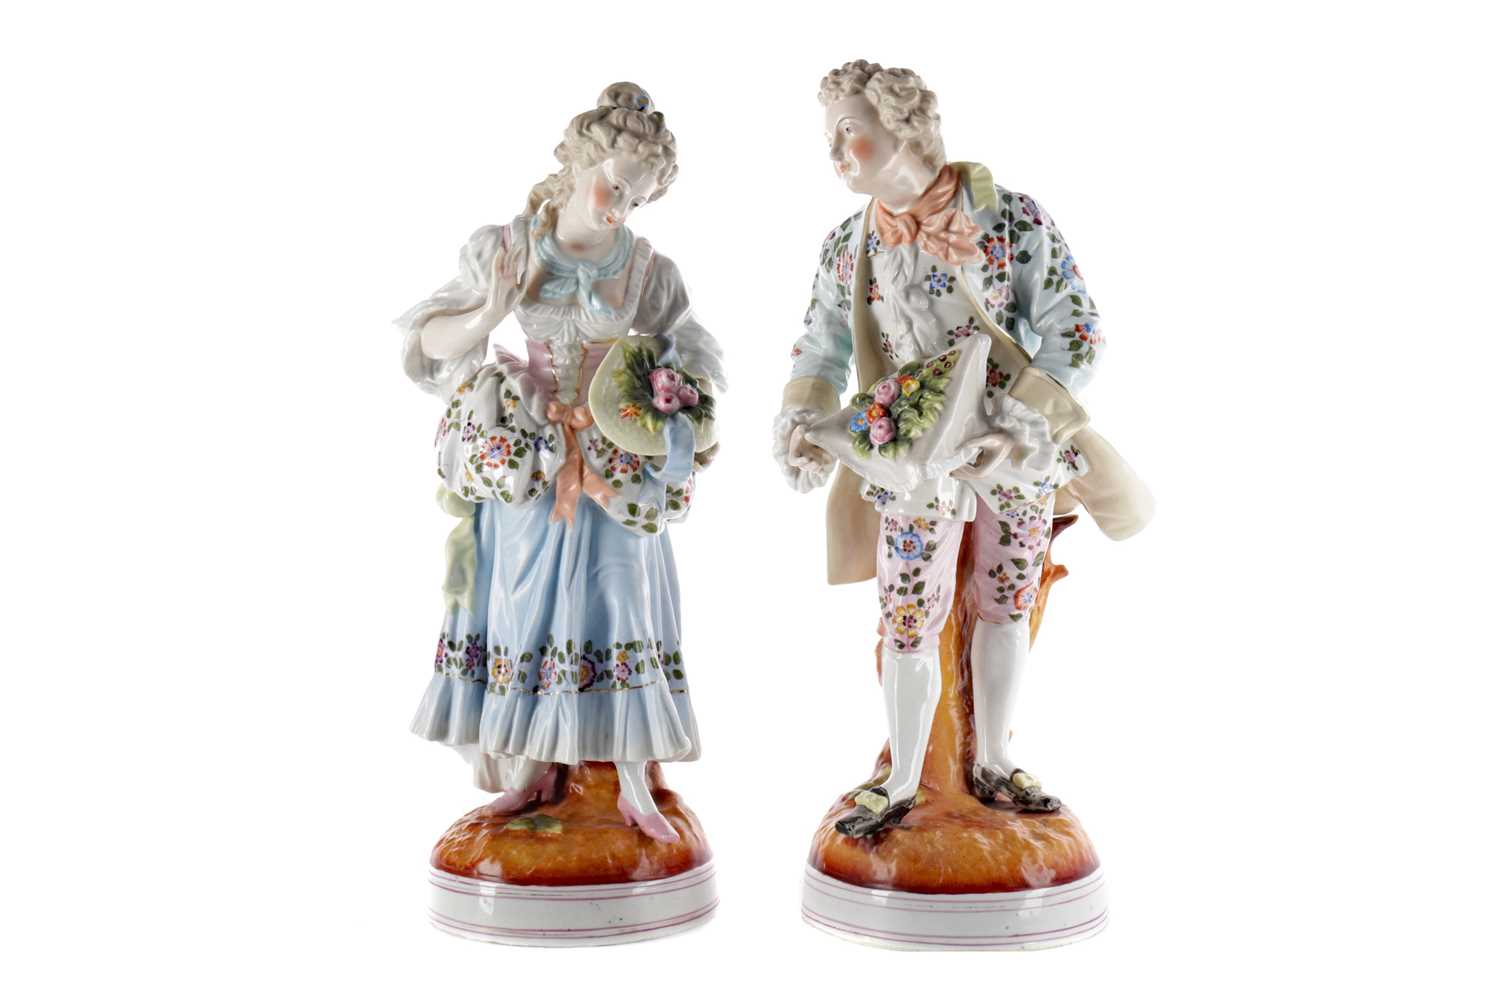 Lot 1020 - A PAIR OF LATE 19TH CENTURY GERMAN FIGURES ALONG WITH A RUSSIAN FIGURE